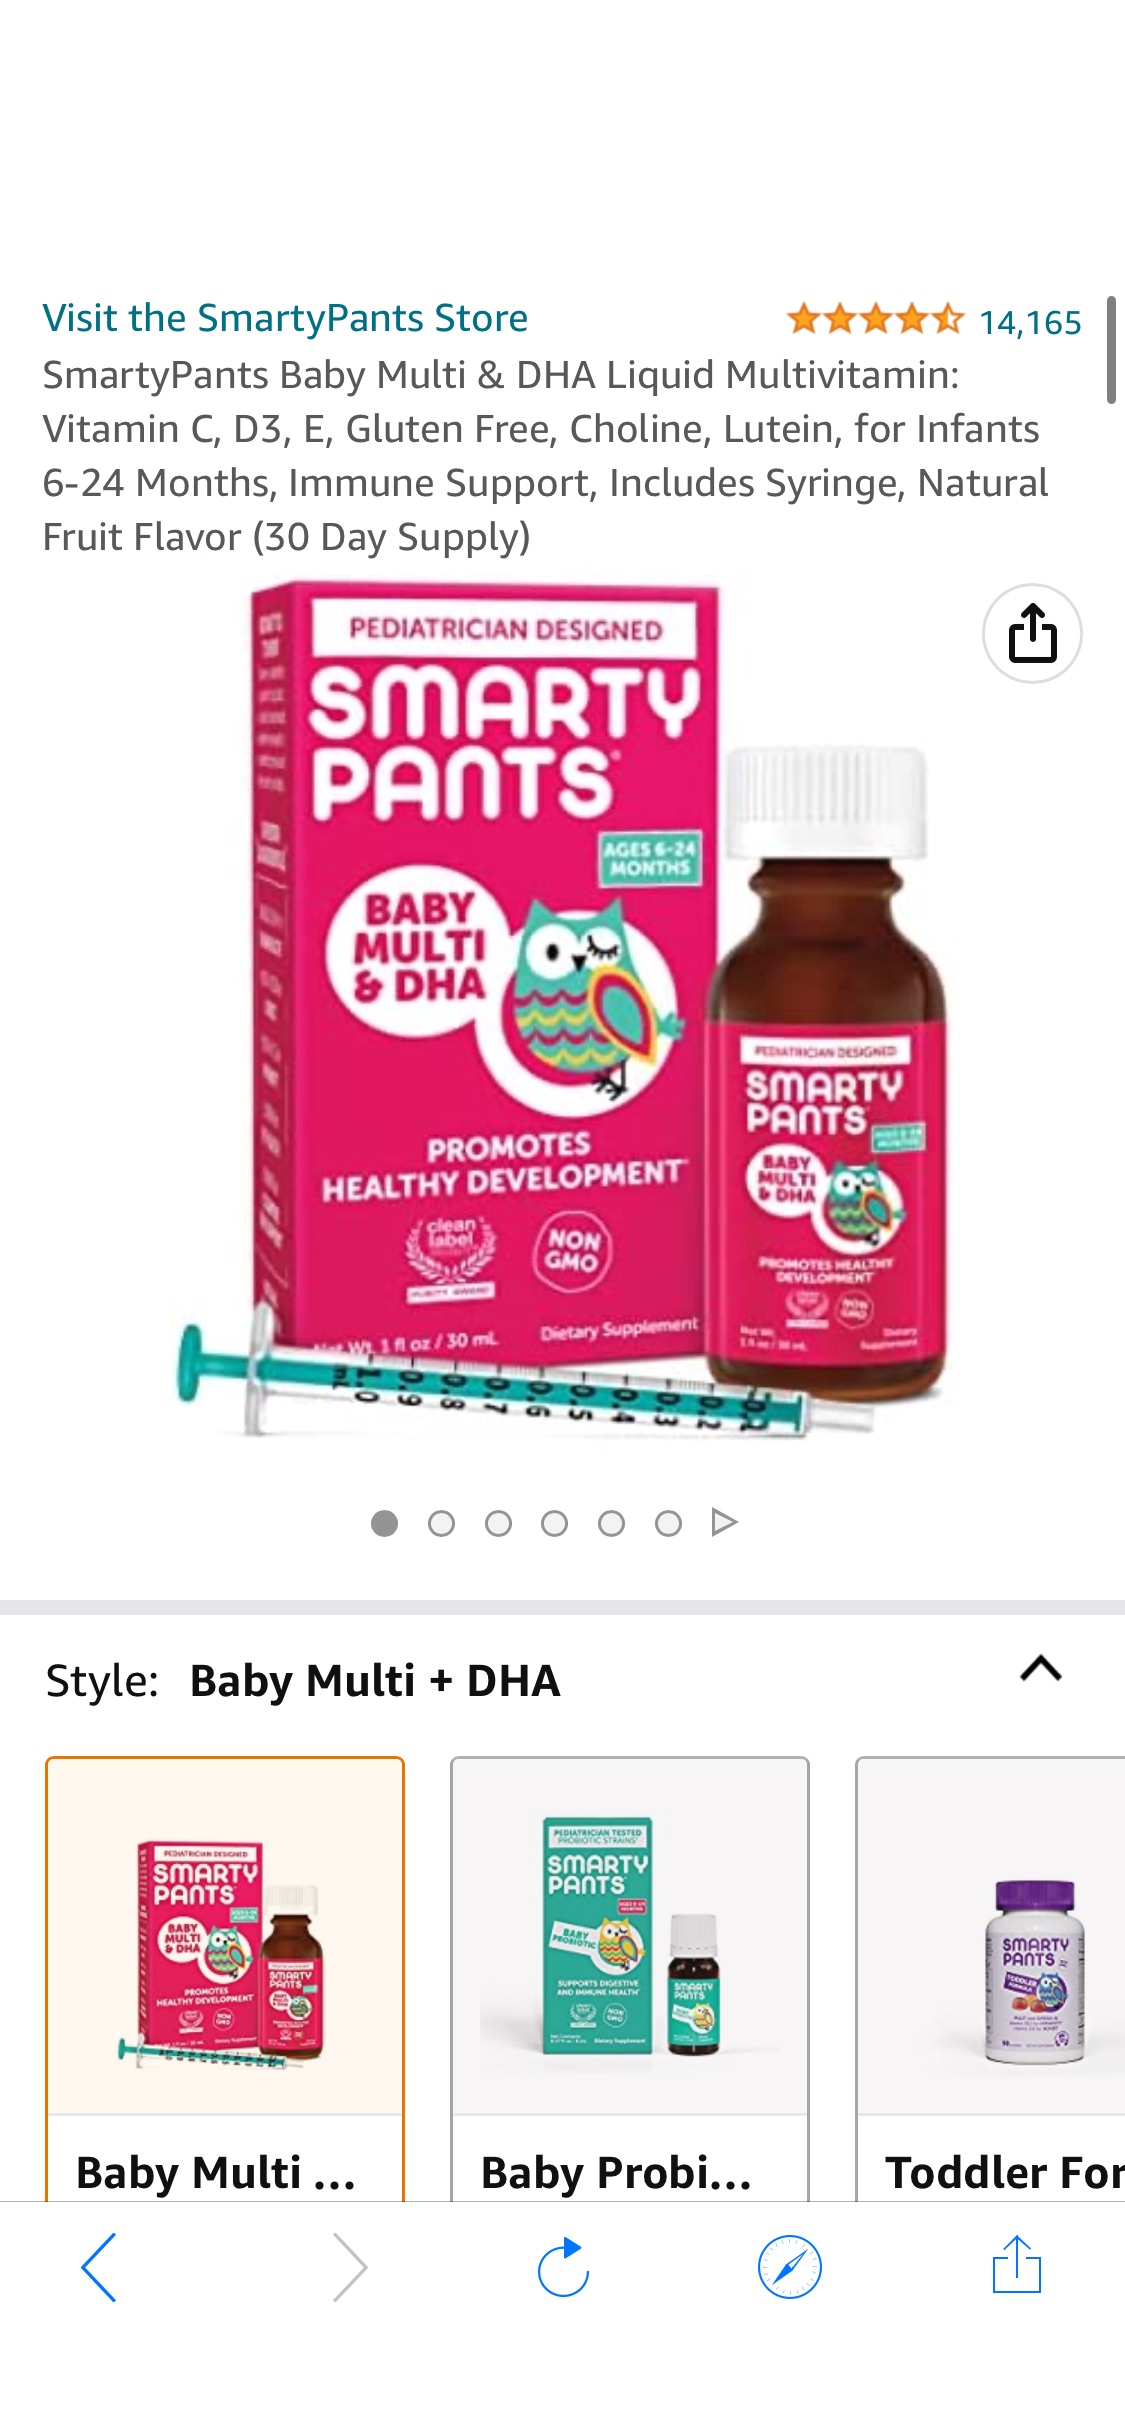 SmartyPants Baby Multi & DHA Liquid Multivitamin: Vitamin C, D3, E, Gluten Free, Choline, Lutein, for Infants 6-24 Months, Immune Support, Includes Syringe, Natural Fruit Flavor (30 Day Supply)宝宝营养液